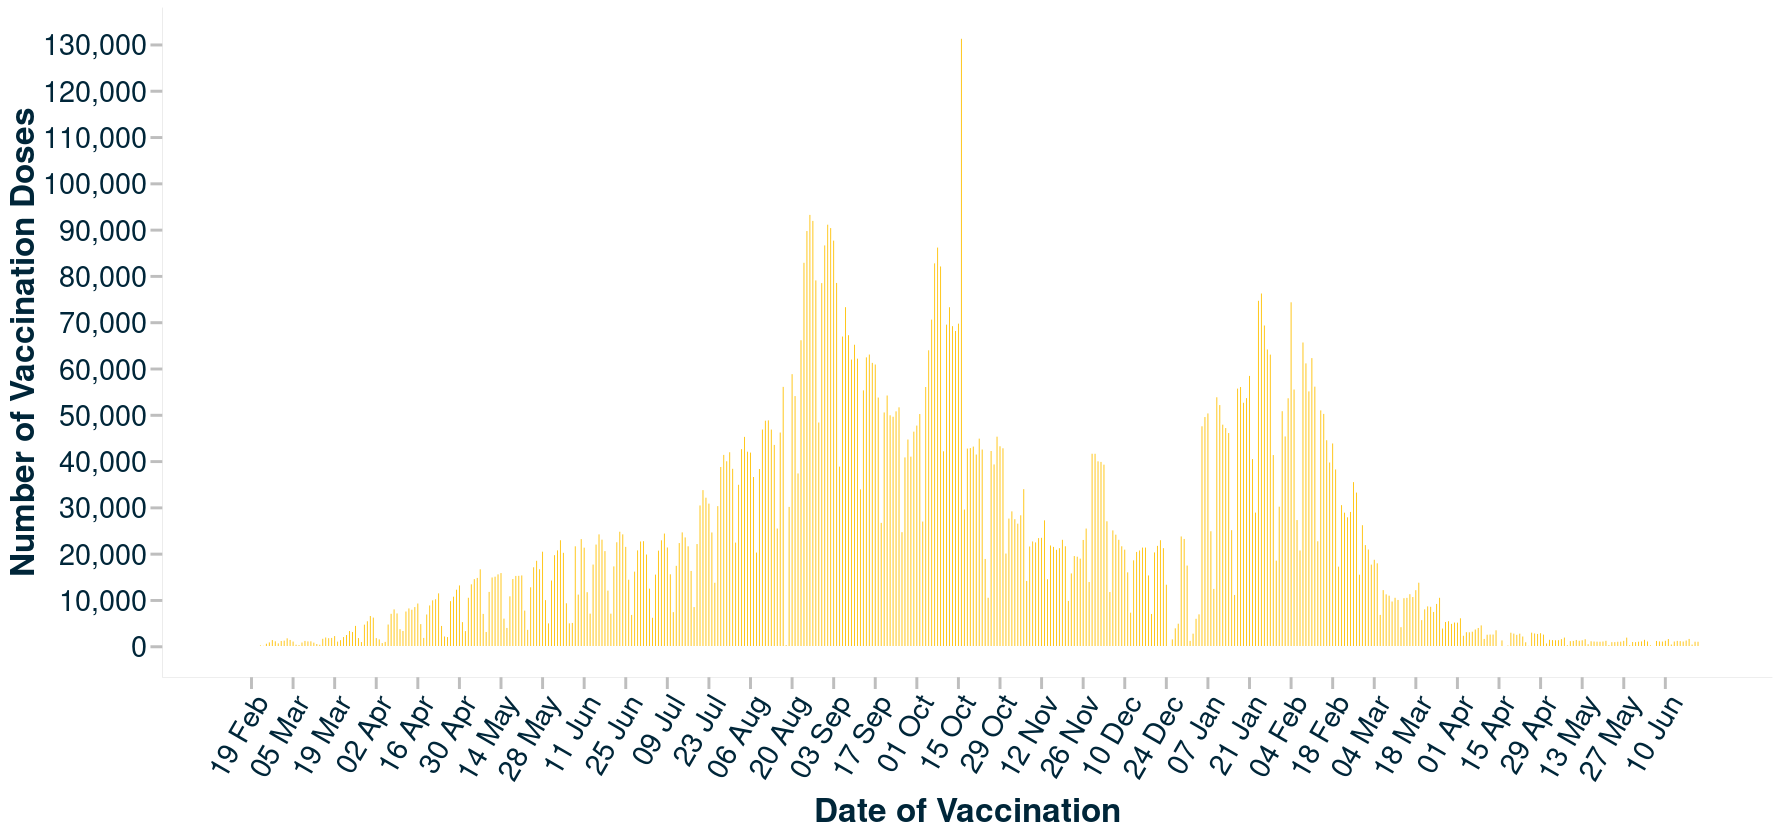 Vaccination doses administered per day